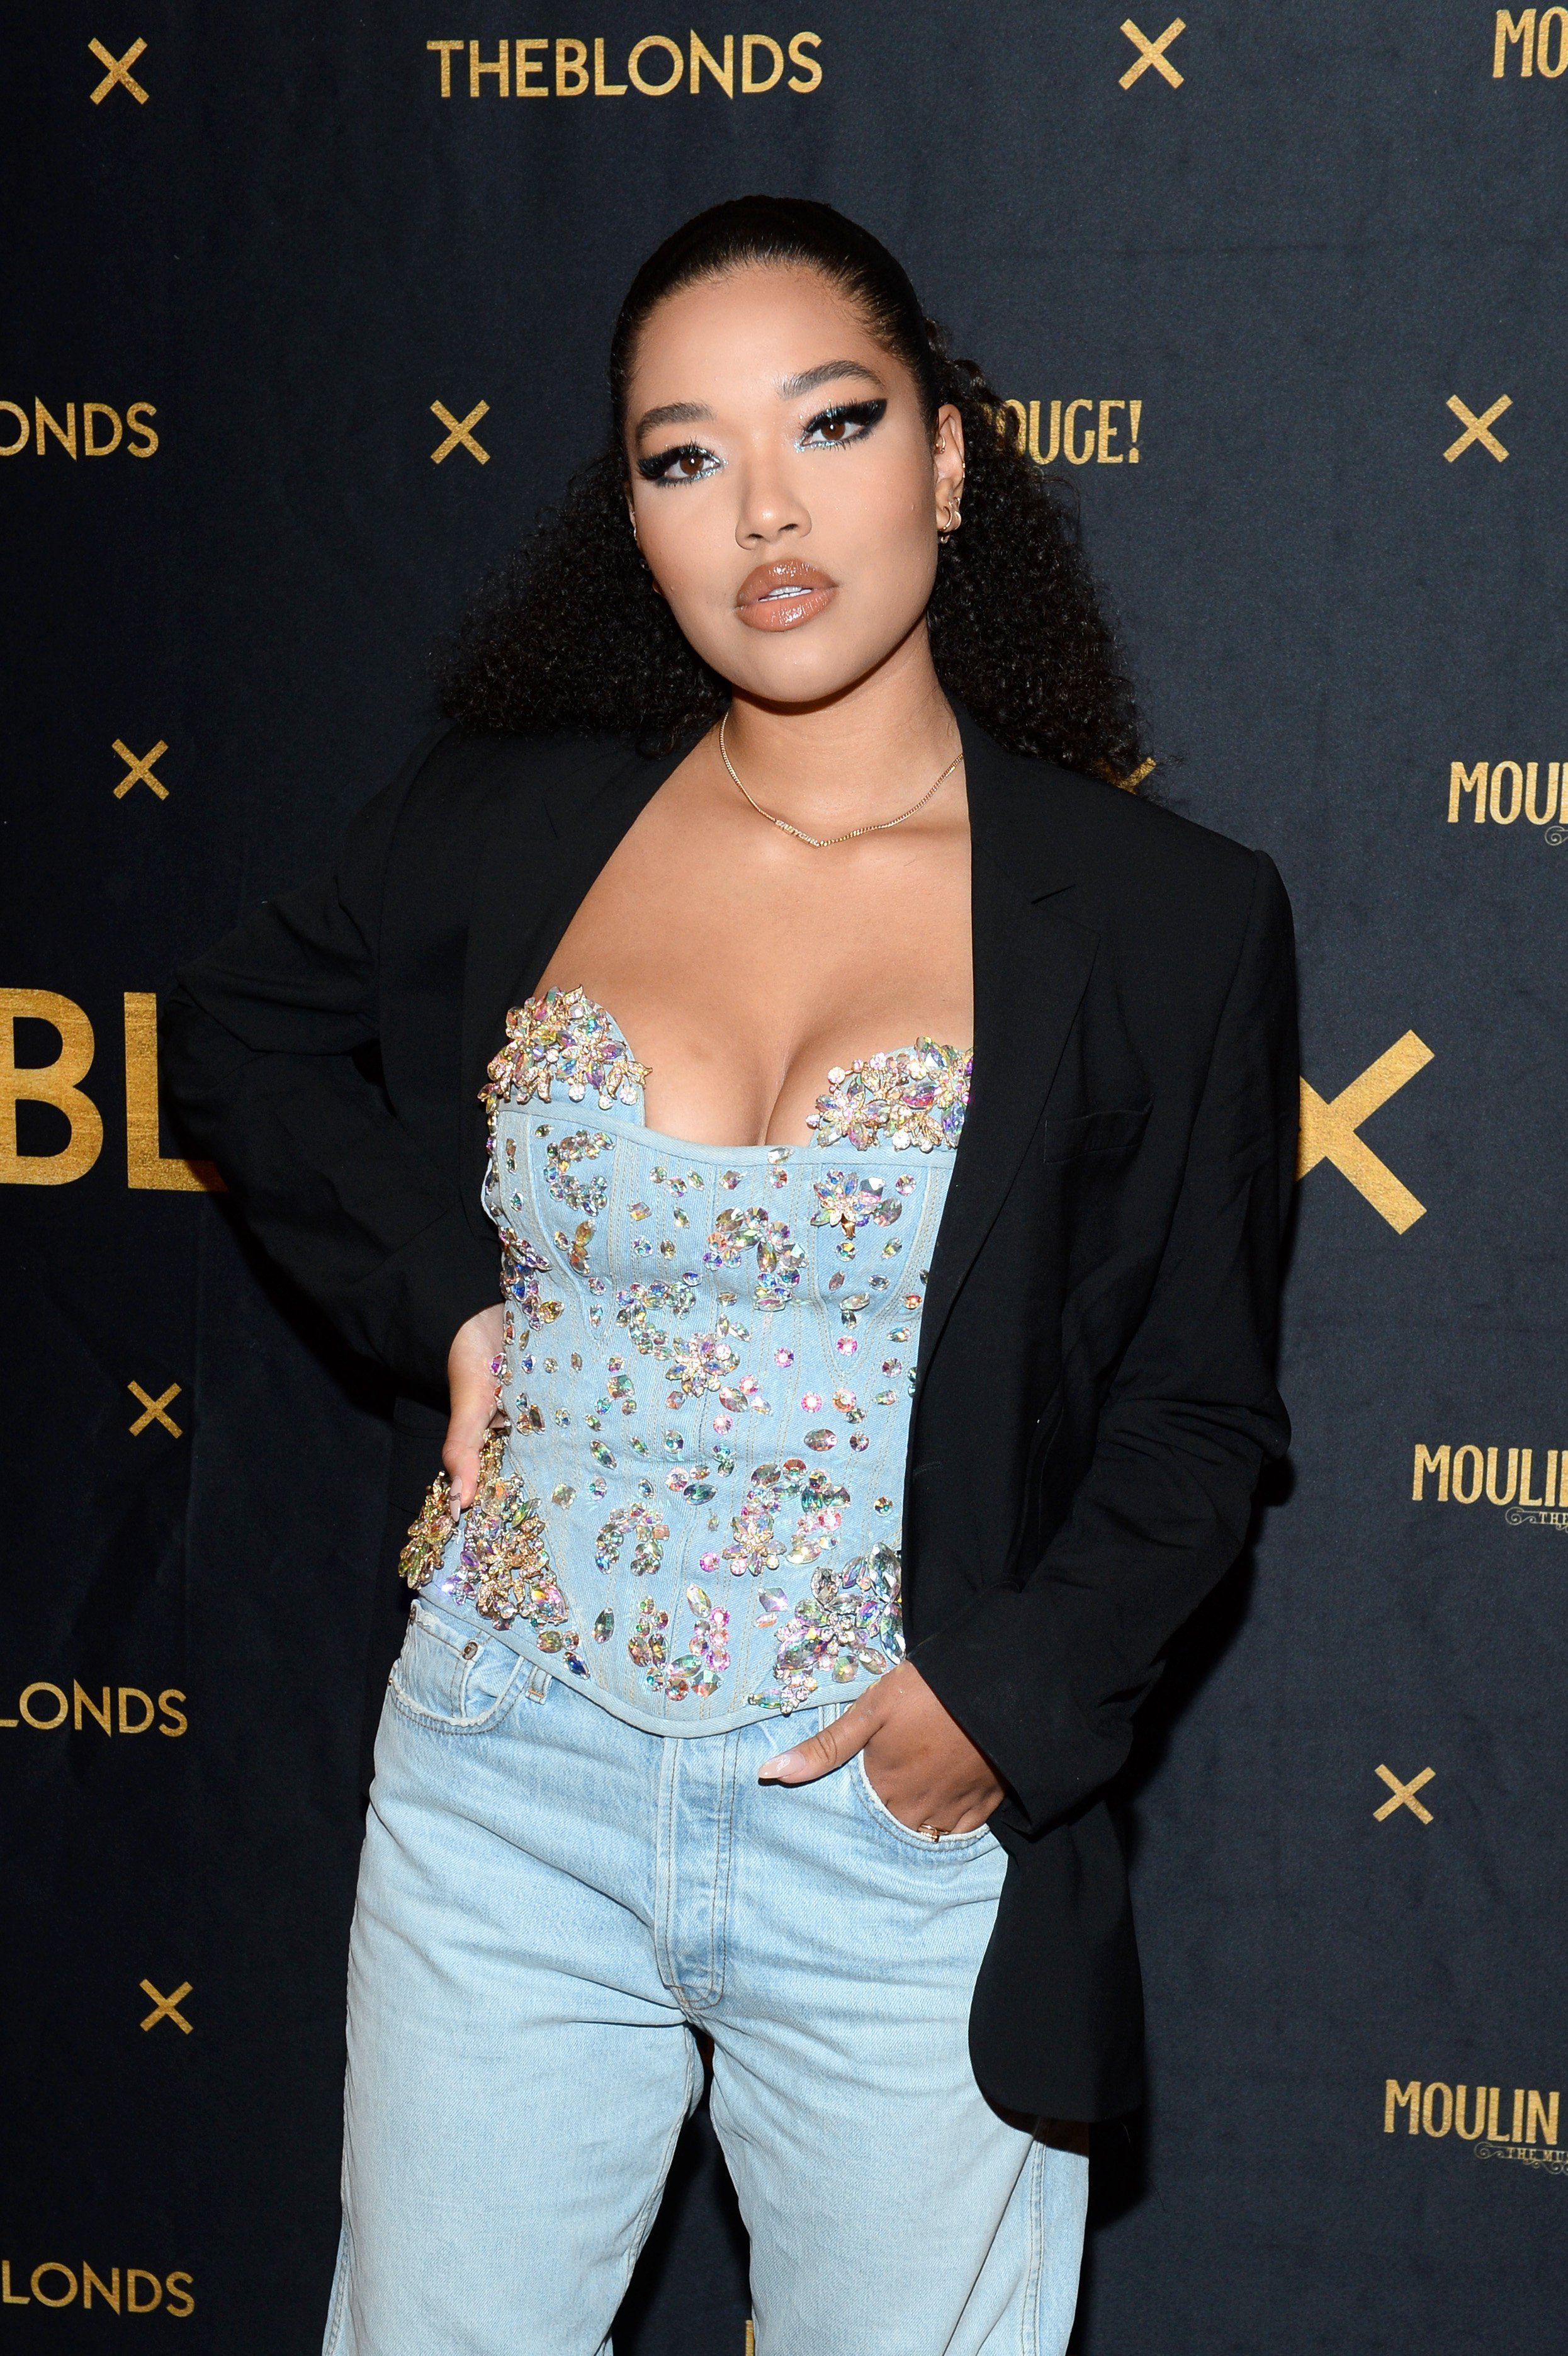 Ming Lee Simmons attending "The Blonds x esMoulin Rouge! The Musical" during New York Fashion Week in September 2019. | Photo: Getty Images